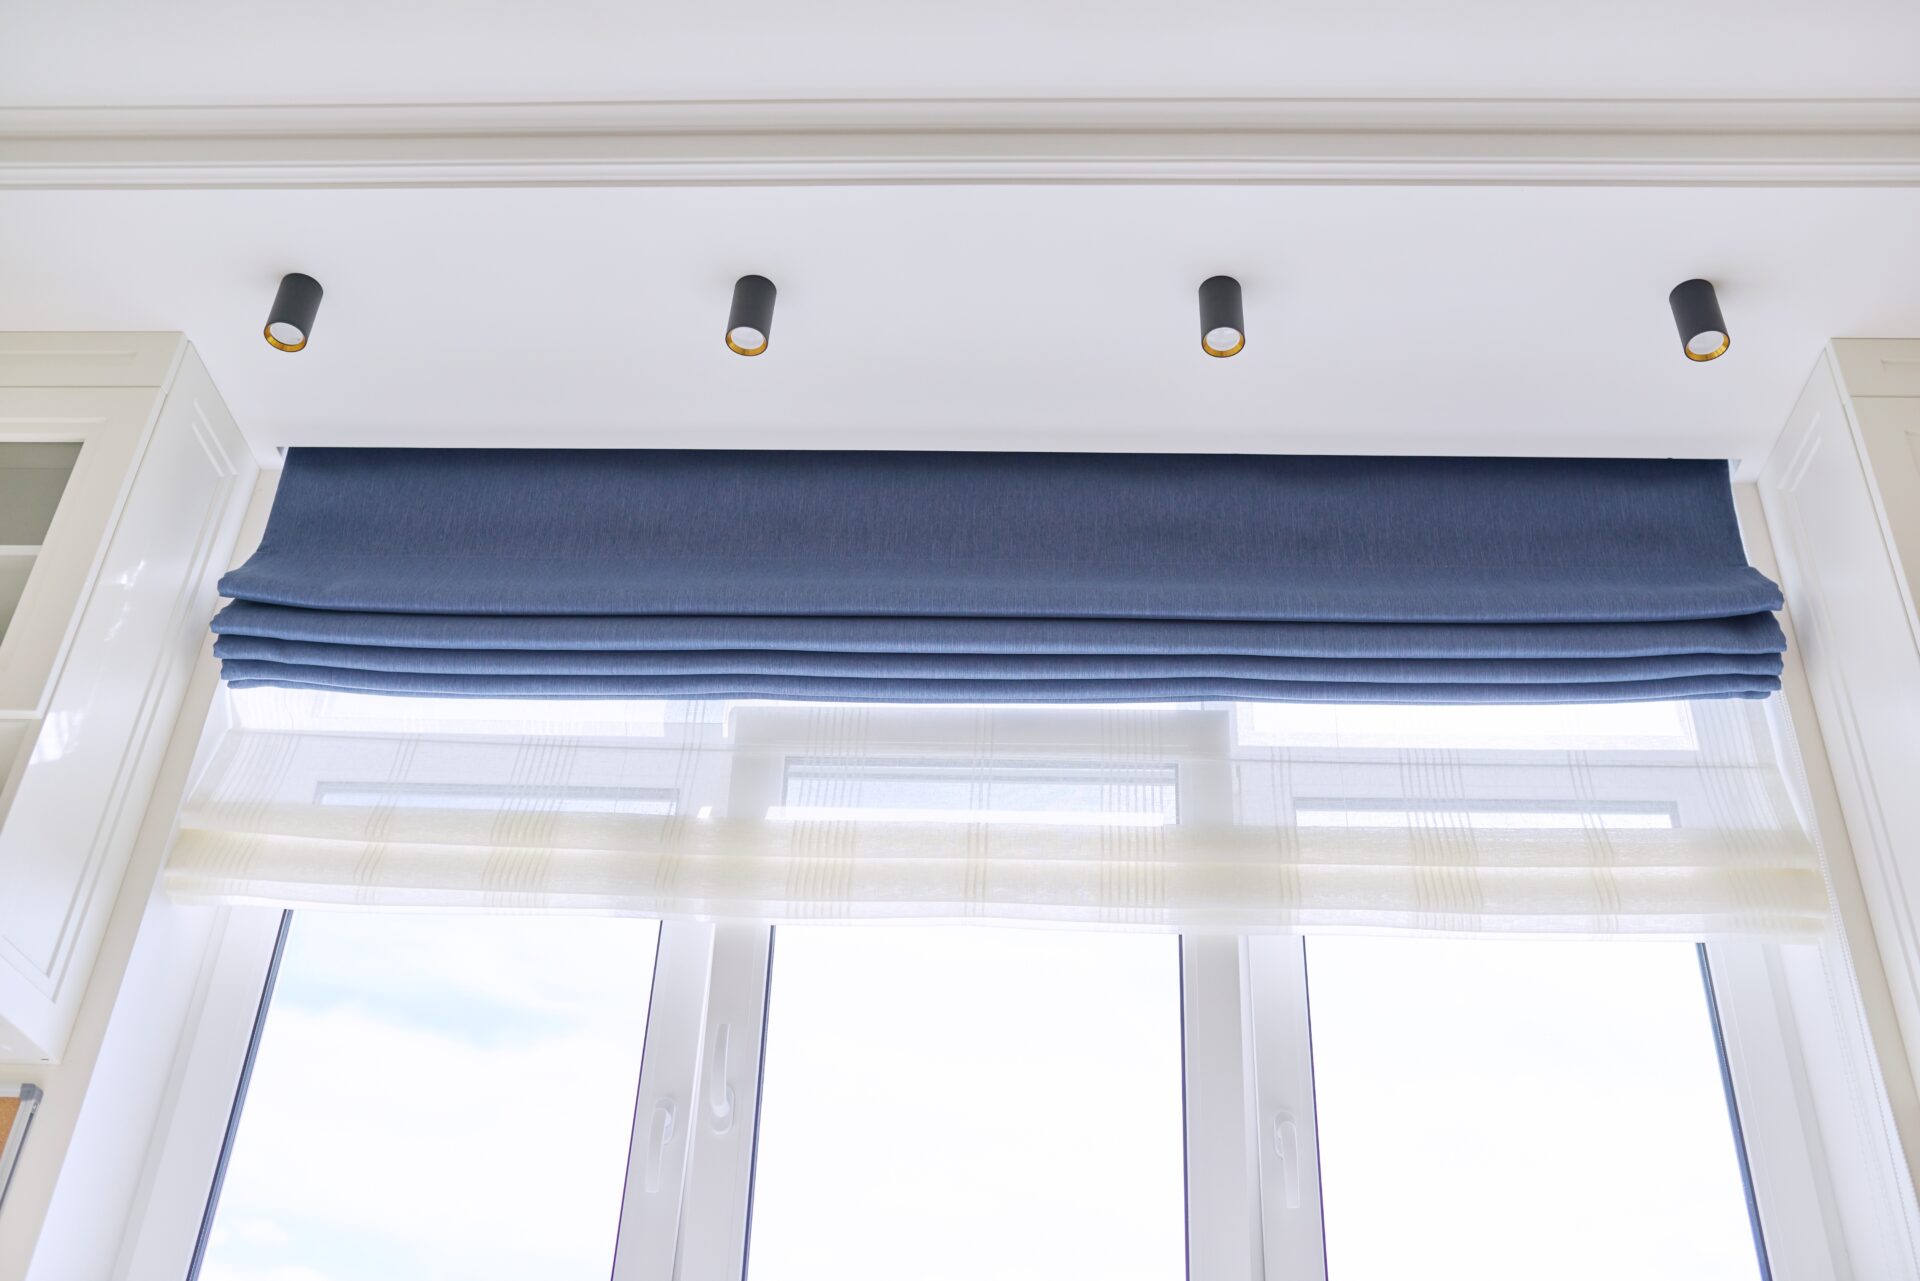 Blue roman blinds in the interior of a room. Blackout blinds to keep light out. Wholesale Blind Factory